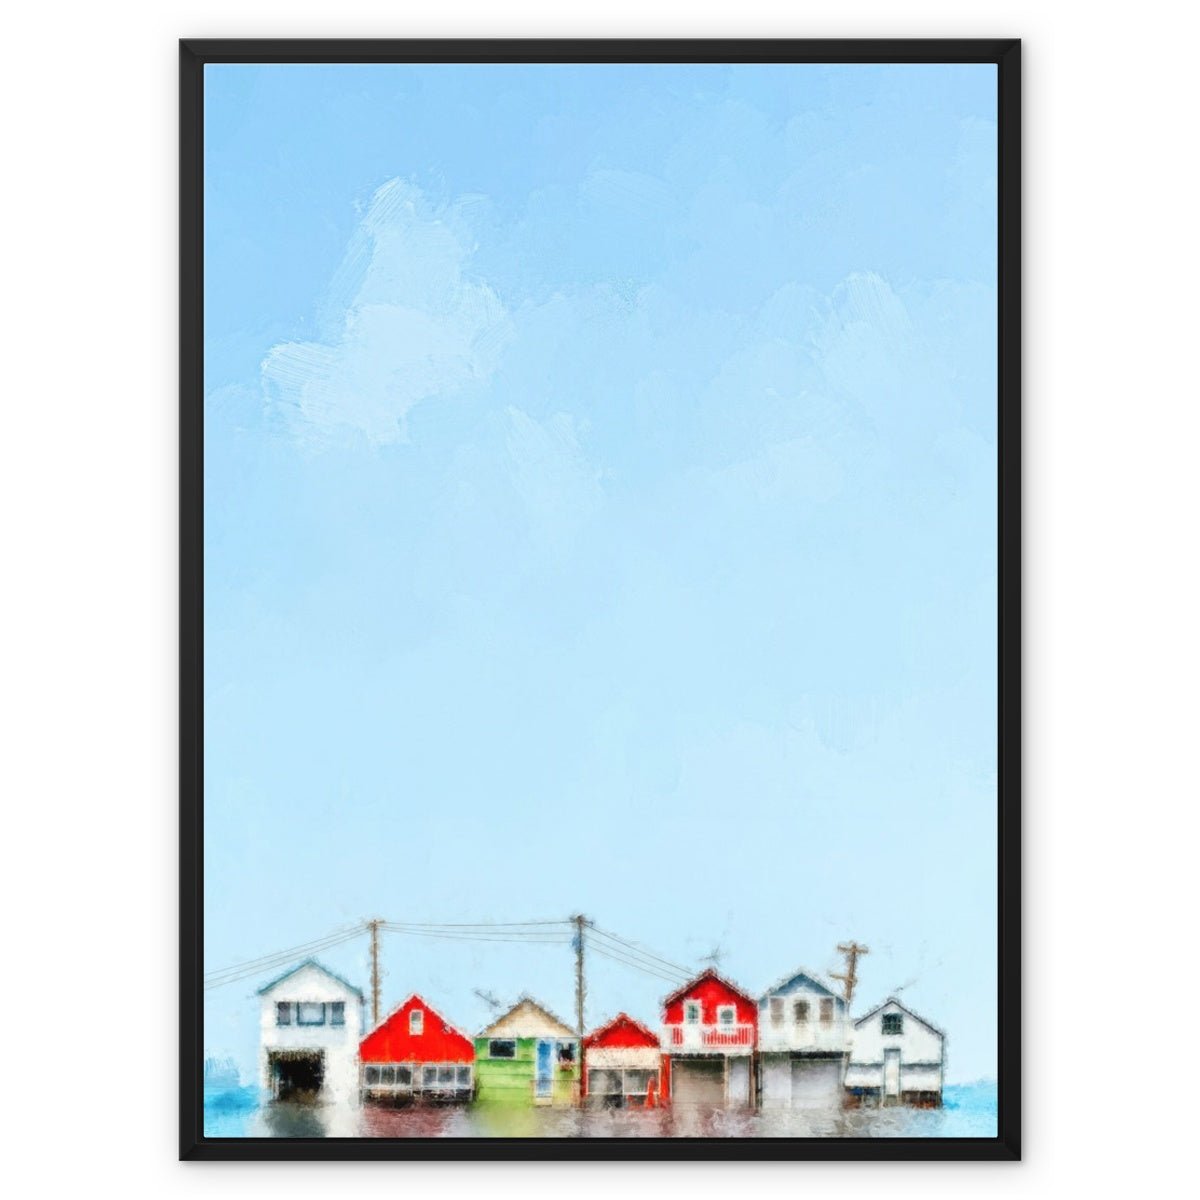 Pelican Piers 7 - New Canvas Print by doingly